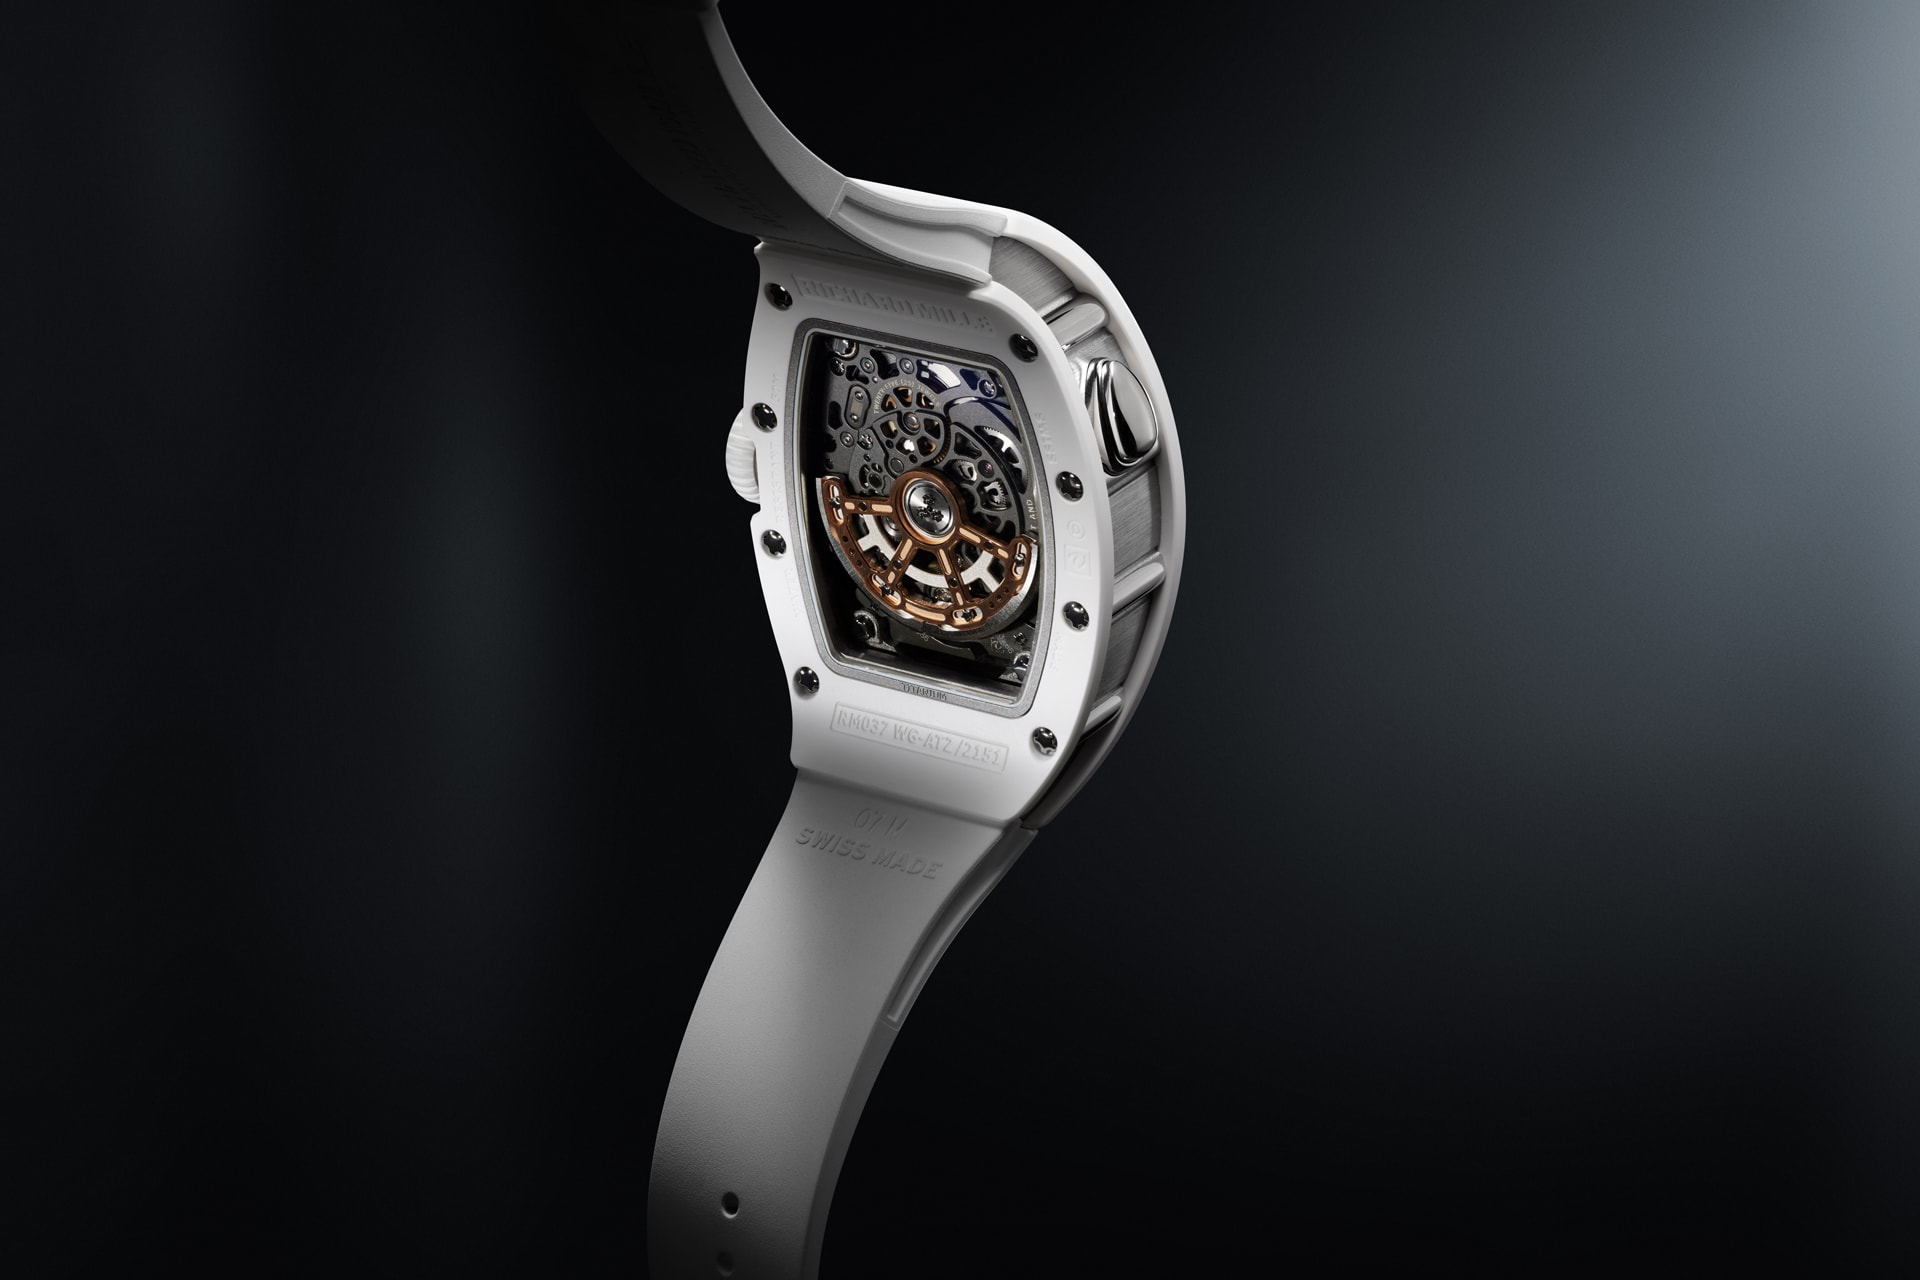 richard mille rm 037 watches ceramic carbon tpt gold caliber automatic winding crma1 ladies onyx diamond mother of pearl